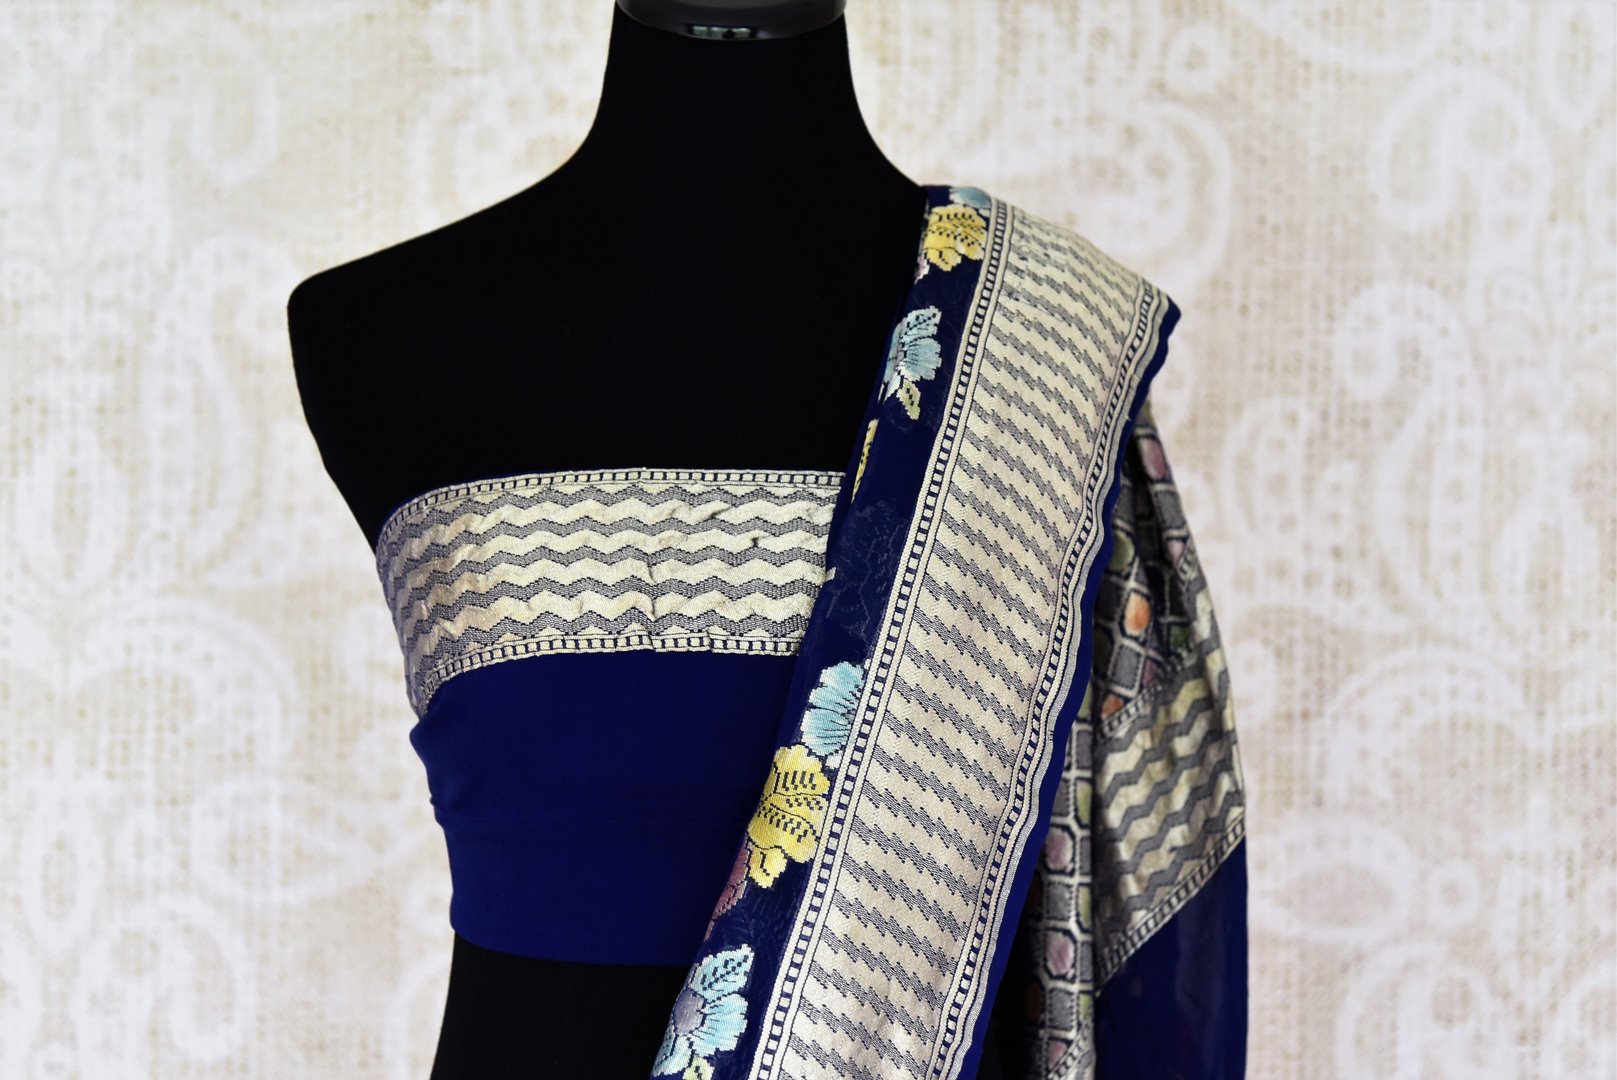 Buy dark blue georgette Benarasi saree online in USA with overall floral zari jaal from Pure Elegance online store. Visit our exclusive Indian clothing store in USA and get floored by a range of exquisite pure handloom sarees, Banarasi sarees, silk sarees, Indian jewelry and much more to complete your ethnic look.-blouse pallu